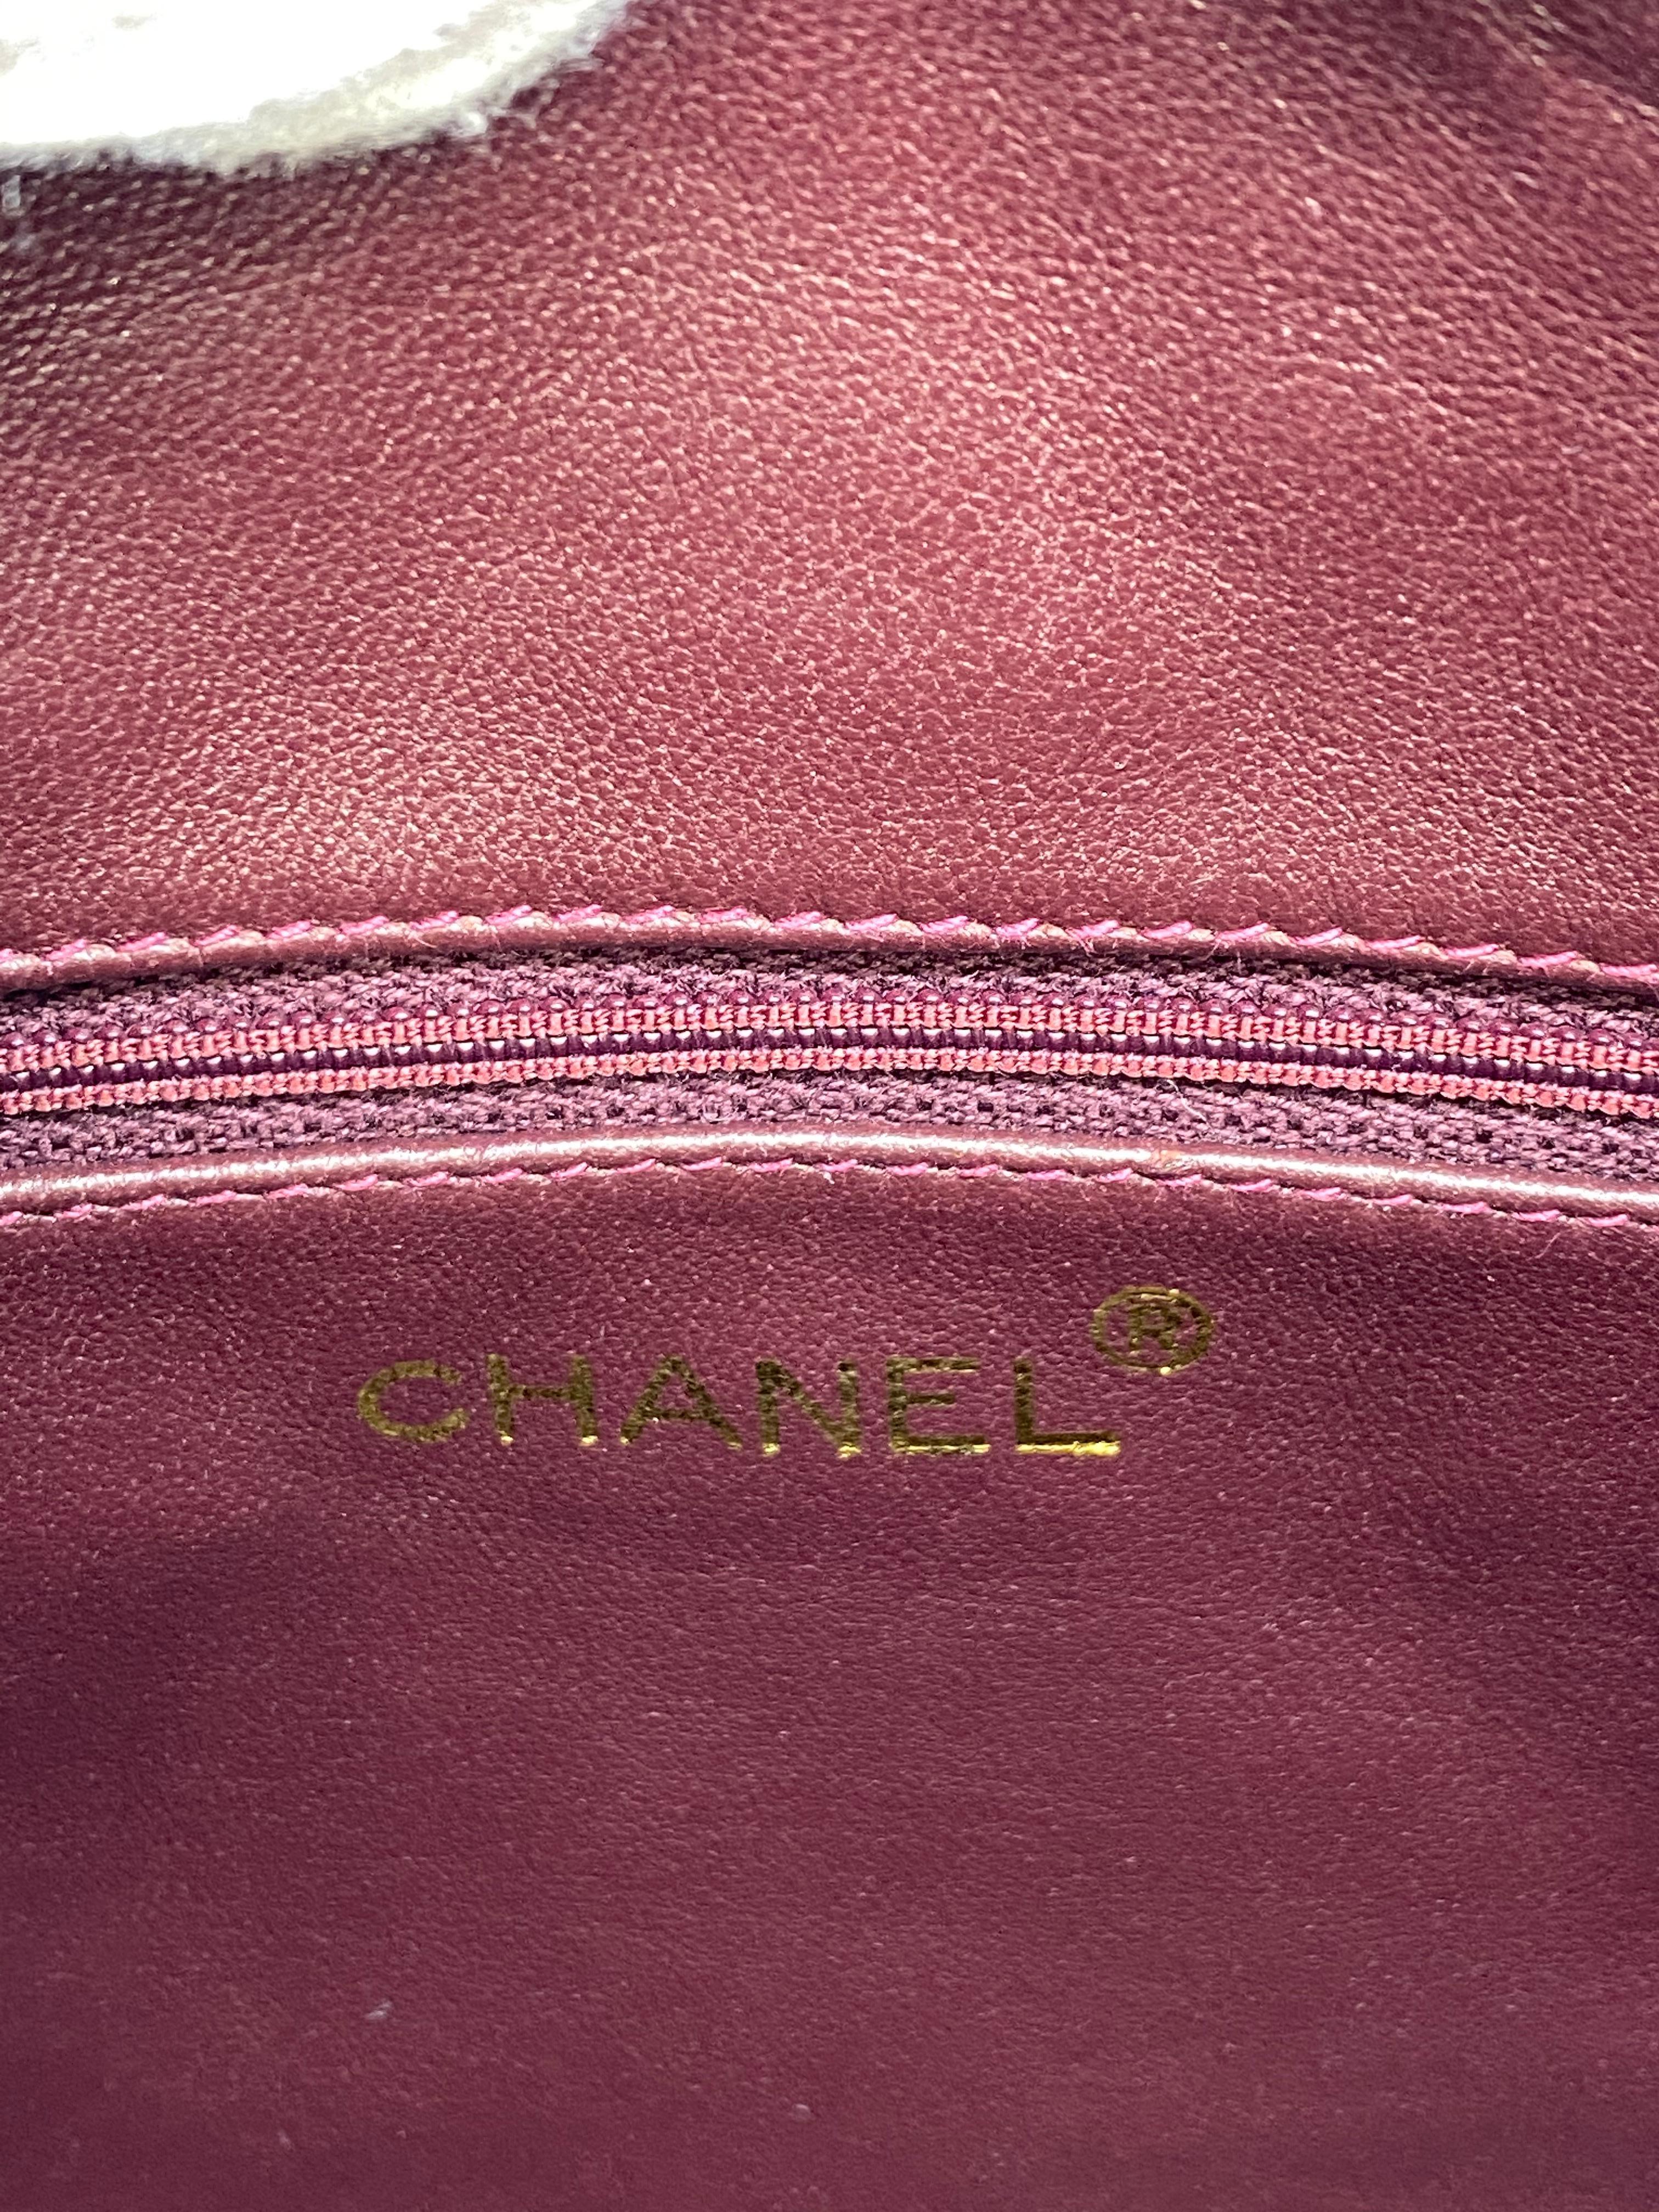 Chanel Vintage Burgundy Quilted Caviar Leather Camera Bag with Gold Hardware 3